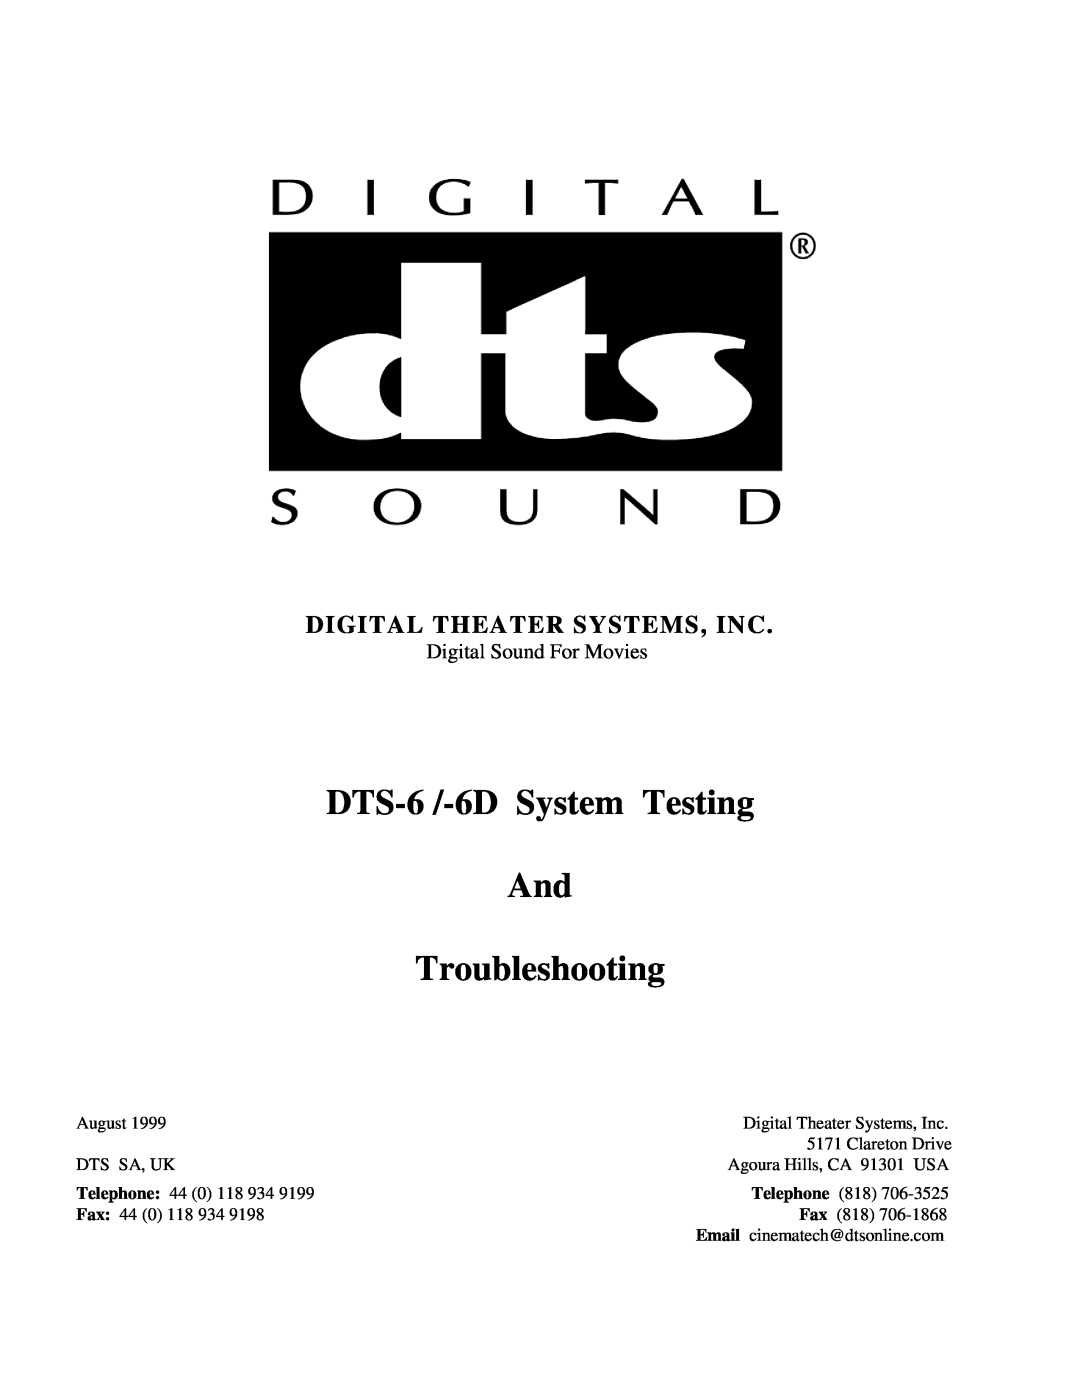 DTS DTS-6D manual Digital Theater Systems, Inc, DTS-6 /-6DSystem Testing And Troubleshooting 